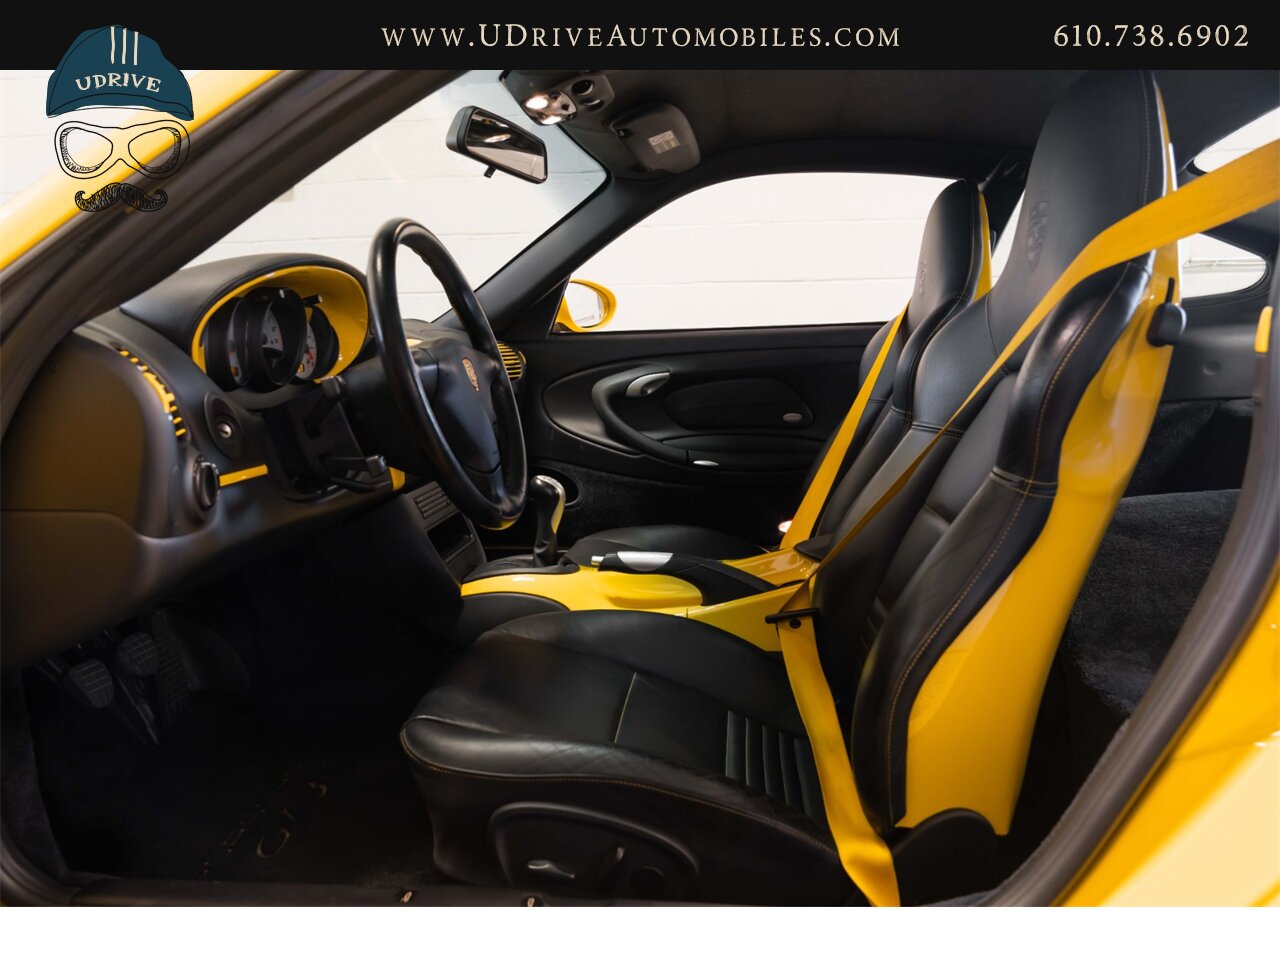 2005 Porsche 911 GT3 996 Speed Yellow Sport Seats Pntd Hardbacks  Pntd Console Deviating Stitch Yellow Accents Throughout - Photo 31 - West Chester, PA 19382